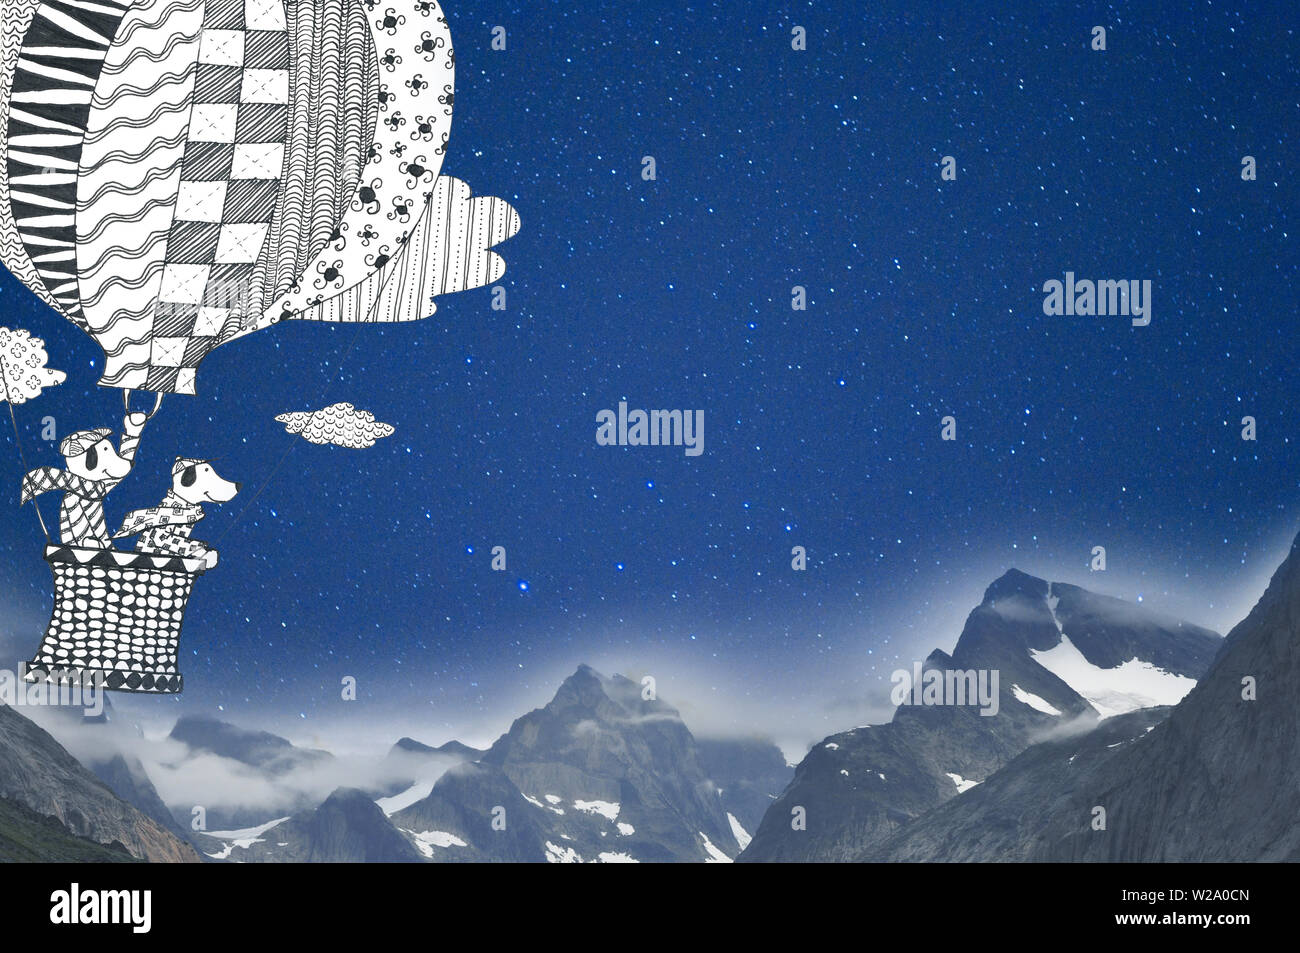 sketch pattern balloon dogs night sky mountians left to right  by jziprian Stock Photo